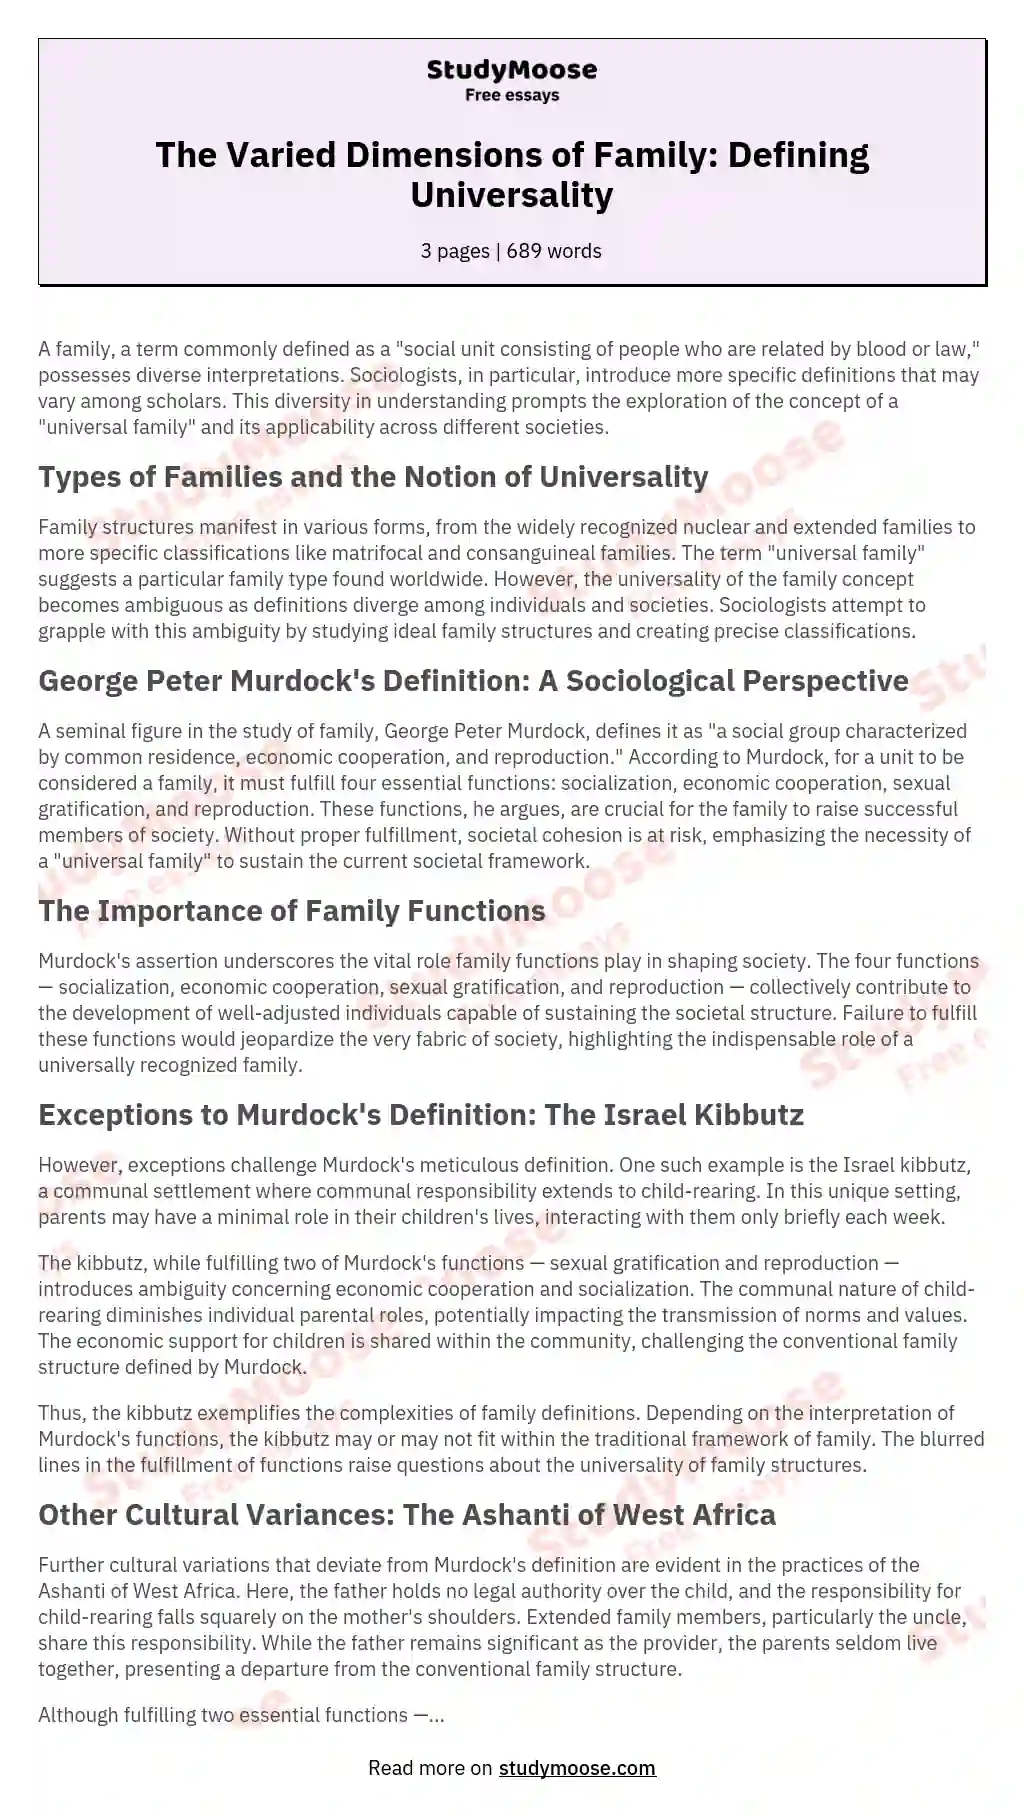 The Varied Dimensions of Family: Defining Universality essay